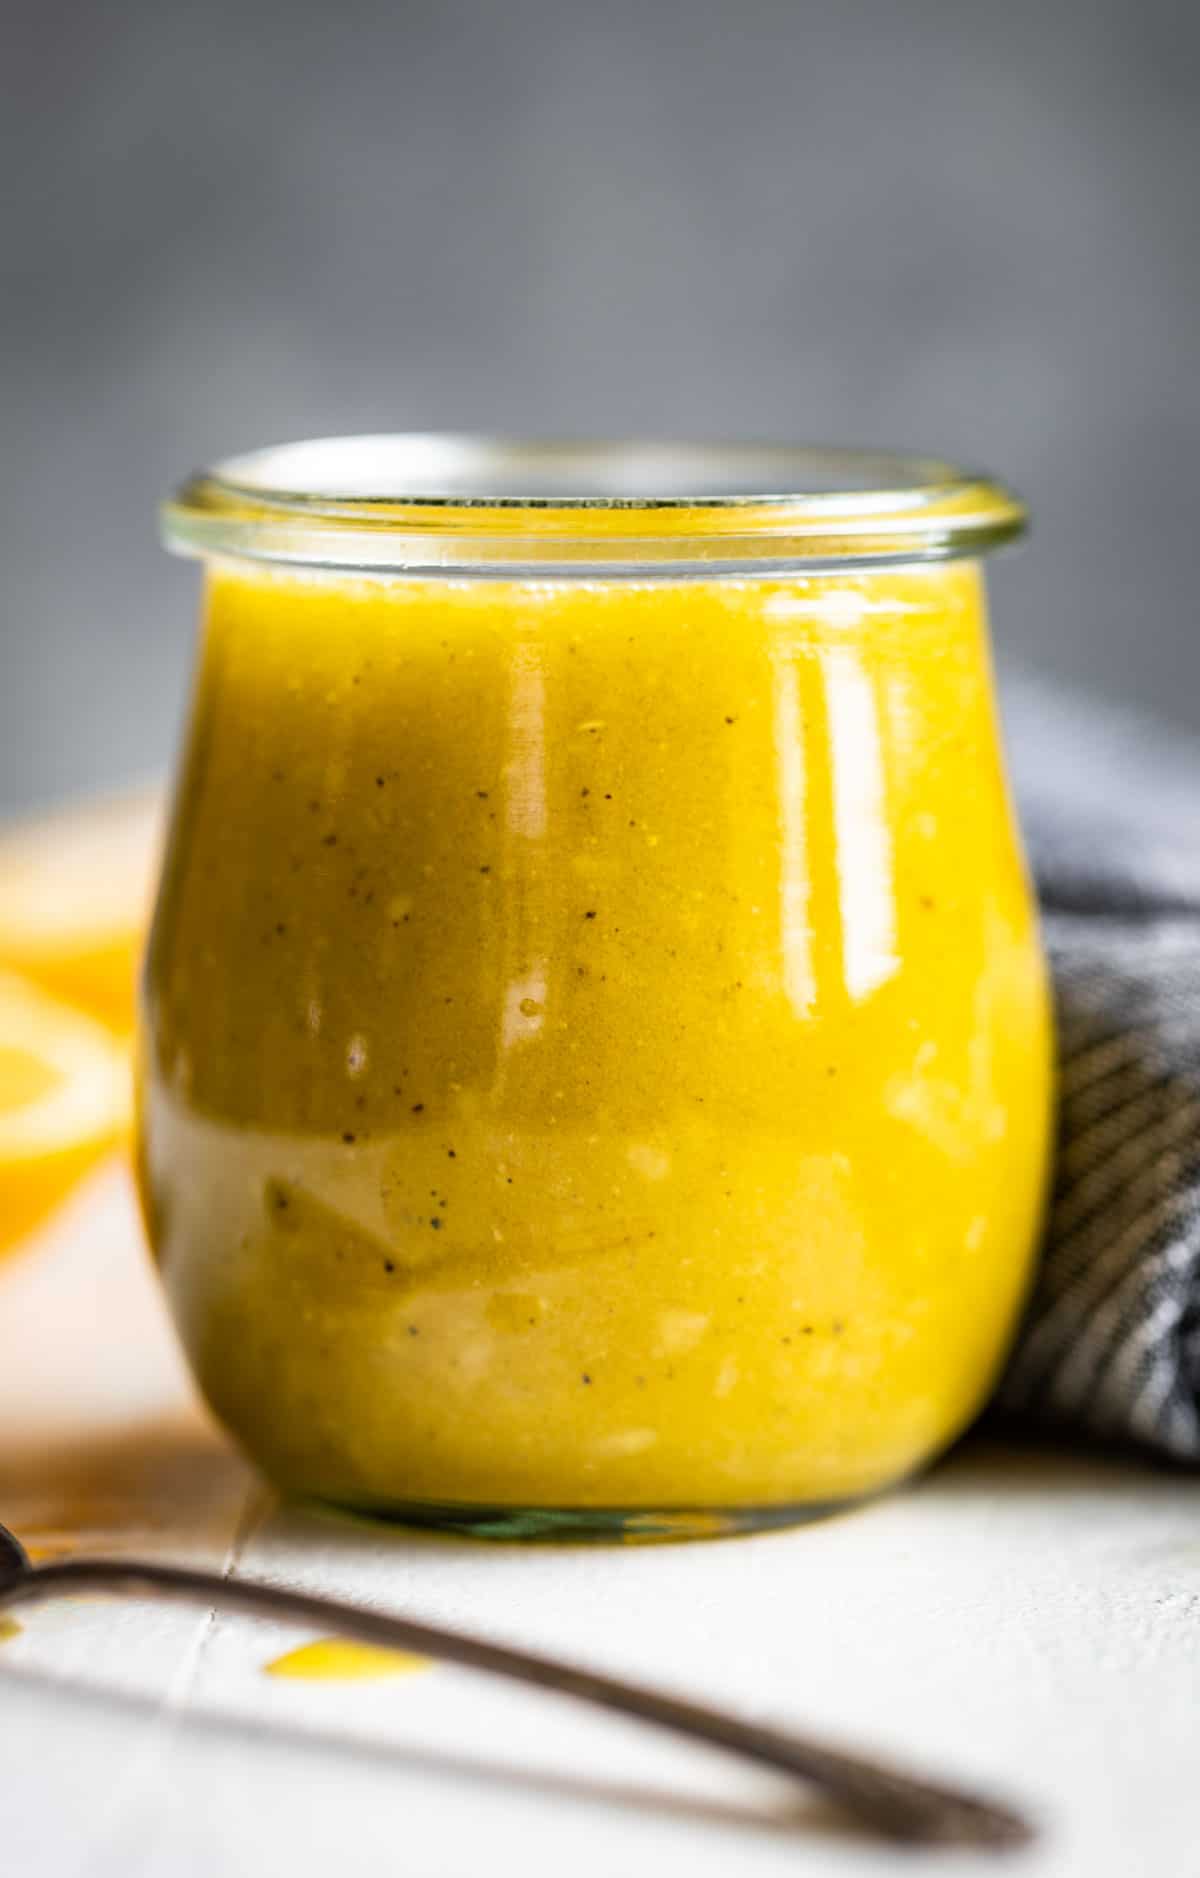 Lemon Vinaigrette in a glass jar with a silver spoon on the side.